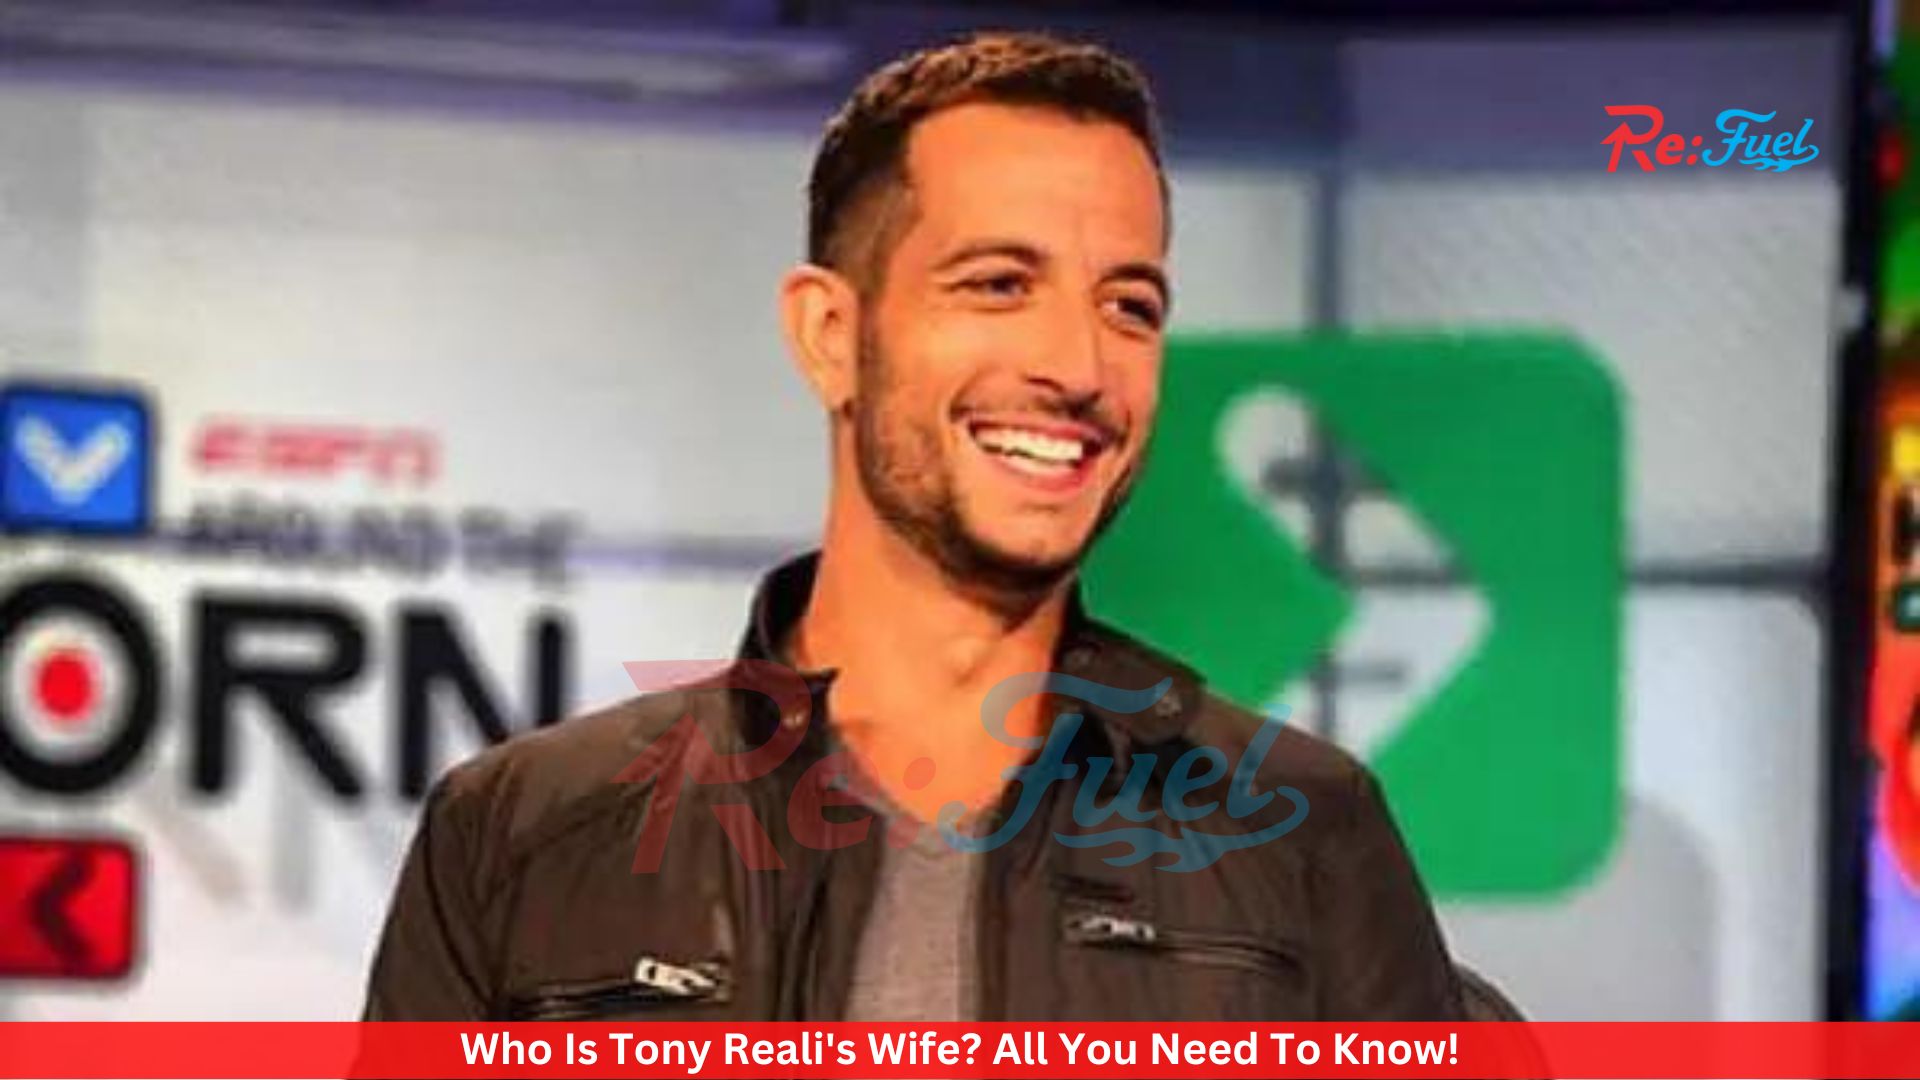 Who Is Tony Reali's Wife? All You Need To Know!